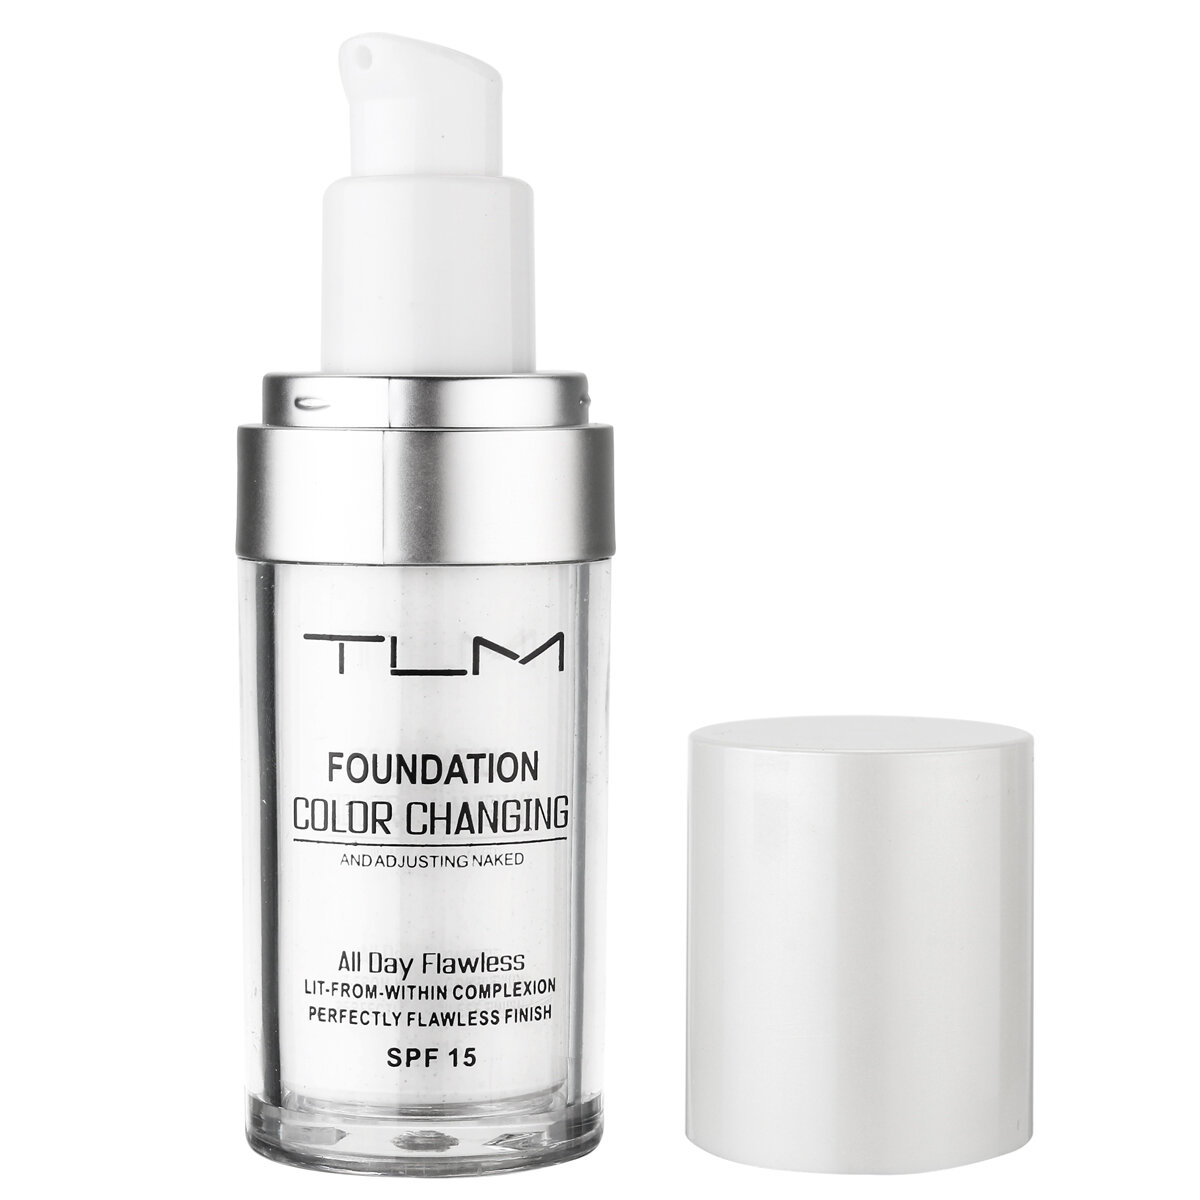 30ml TLM Color Changing Liquid Foundation Makeup Change To Your Skin Tone By Just Blending Liquid Cover Concealer